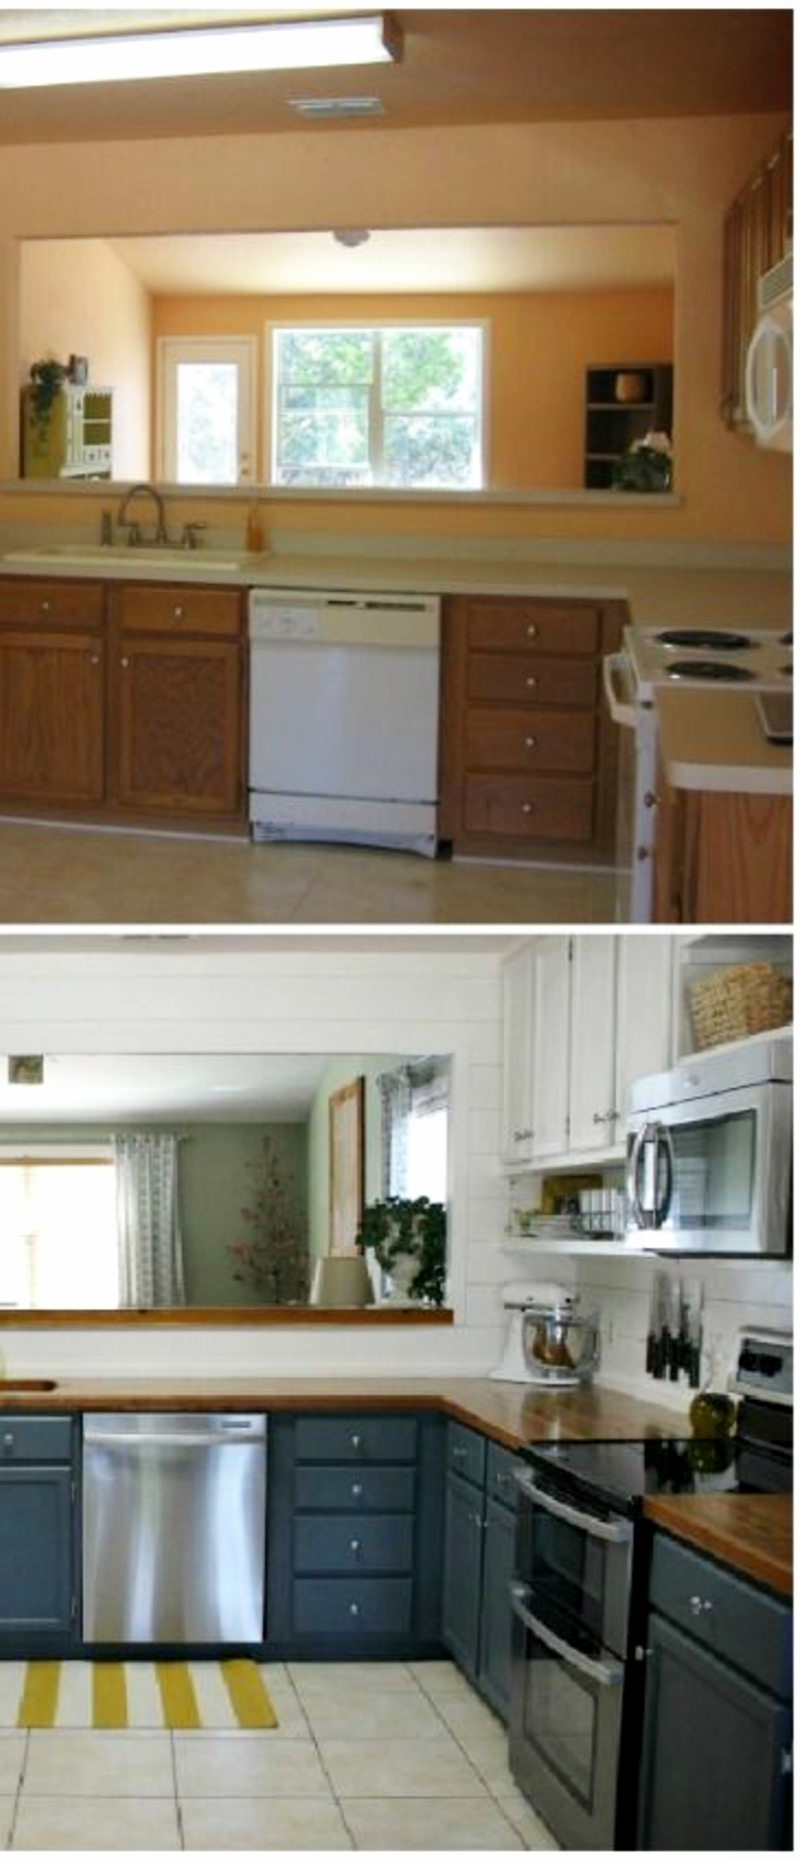 Small kitchen remodel - before and after pictures of small kitchen makeovers #kitchenideas #farmhousedecor #kitchendecor #kitchenremodel #diyhomedecor #homedecorideas #farmhousekitchen